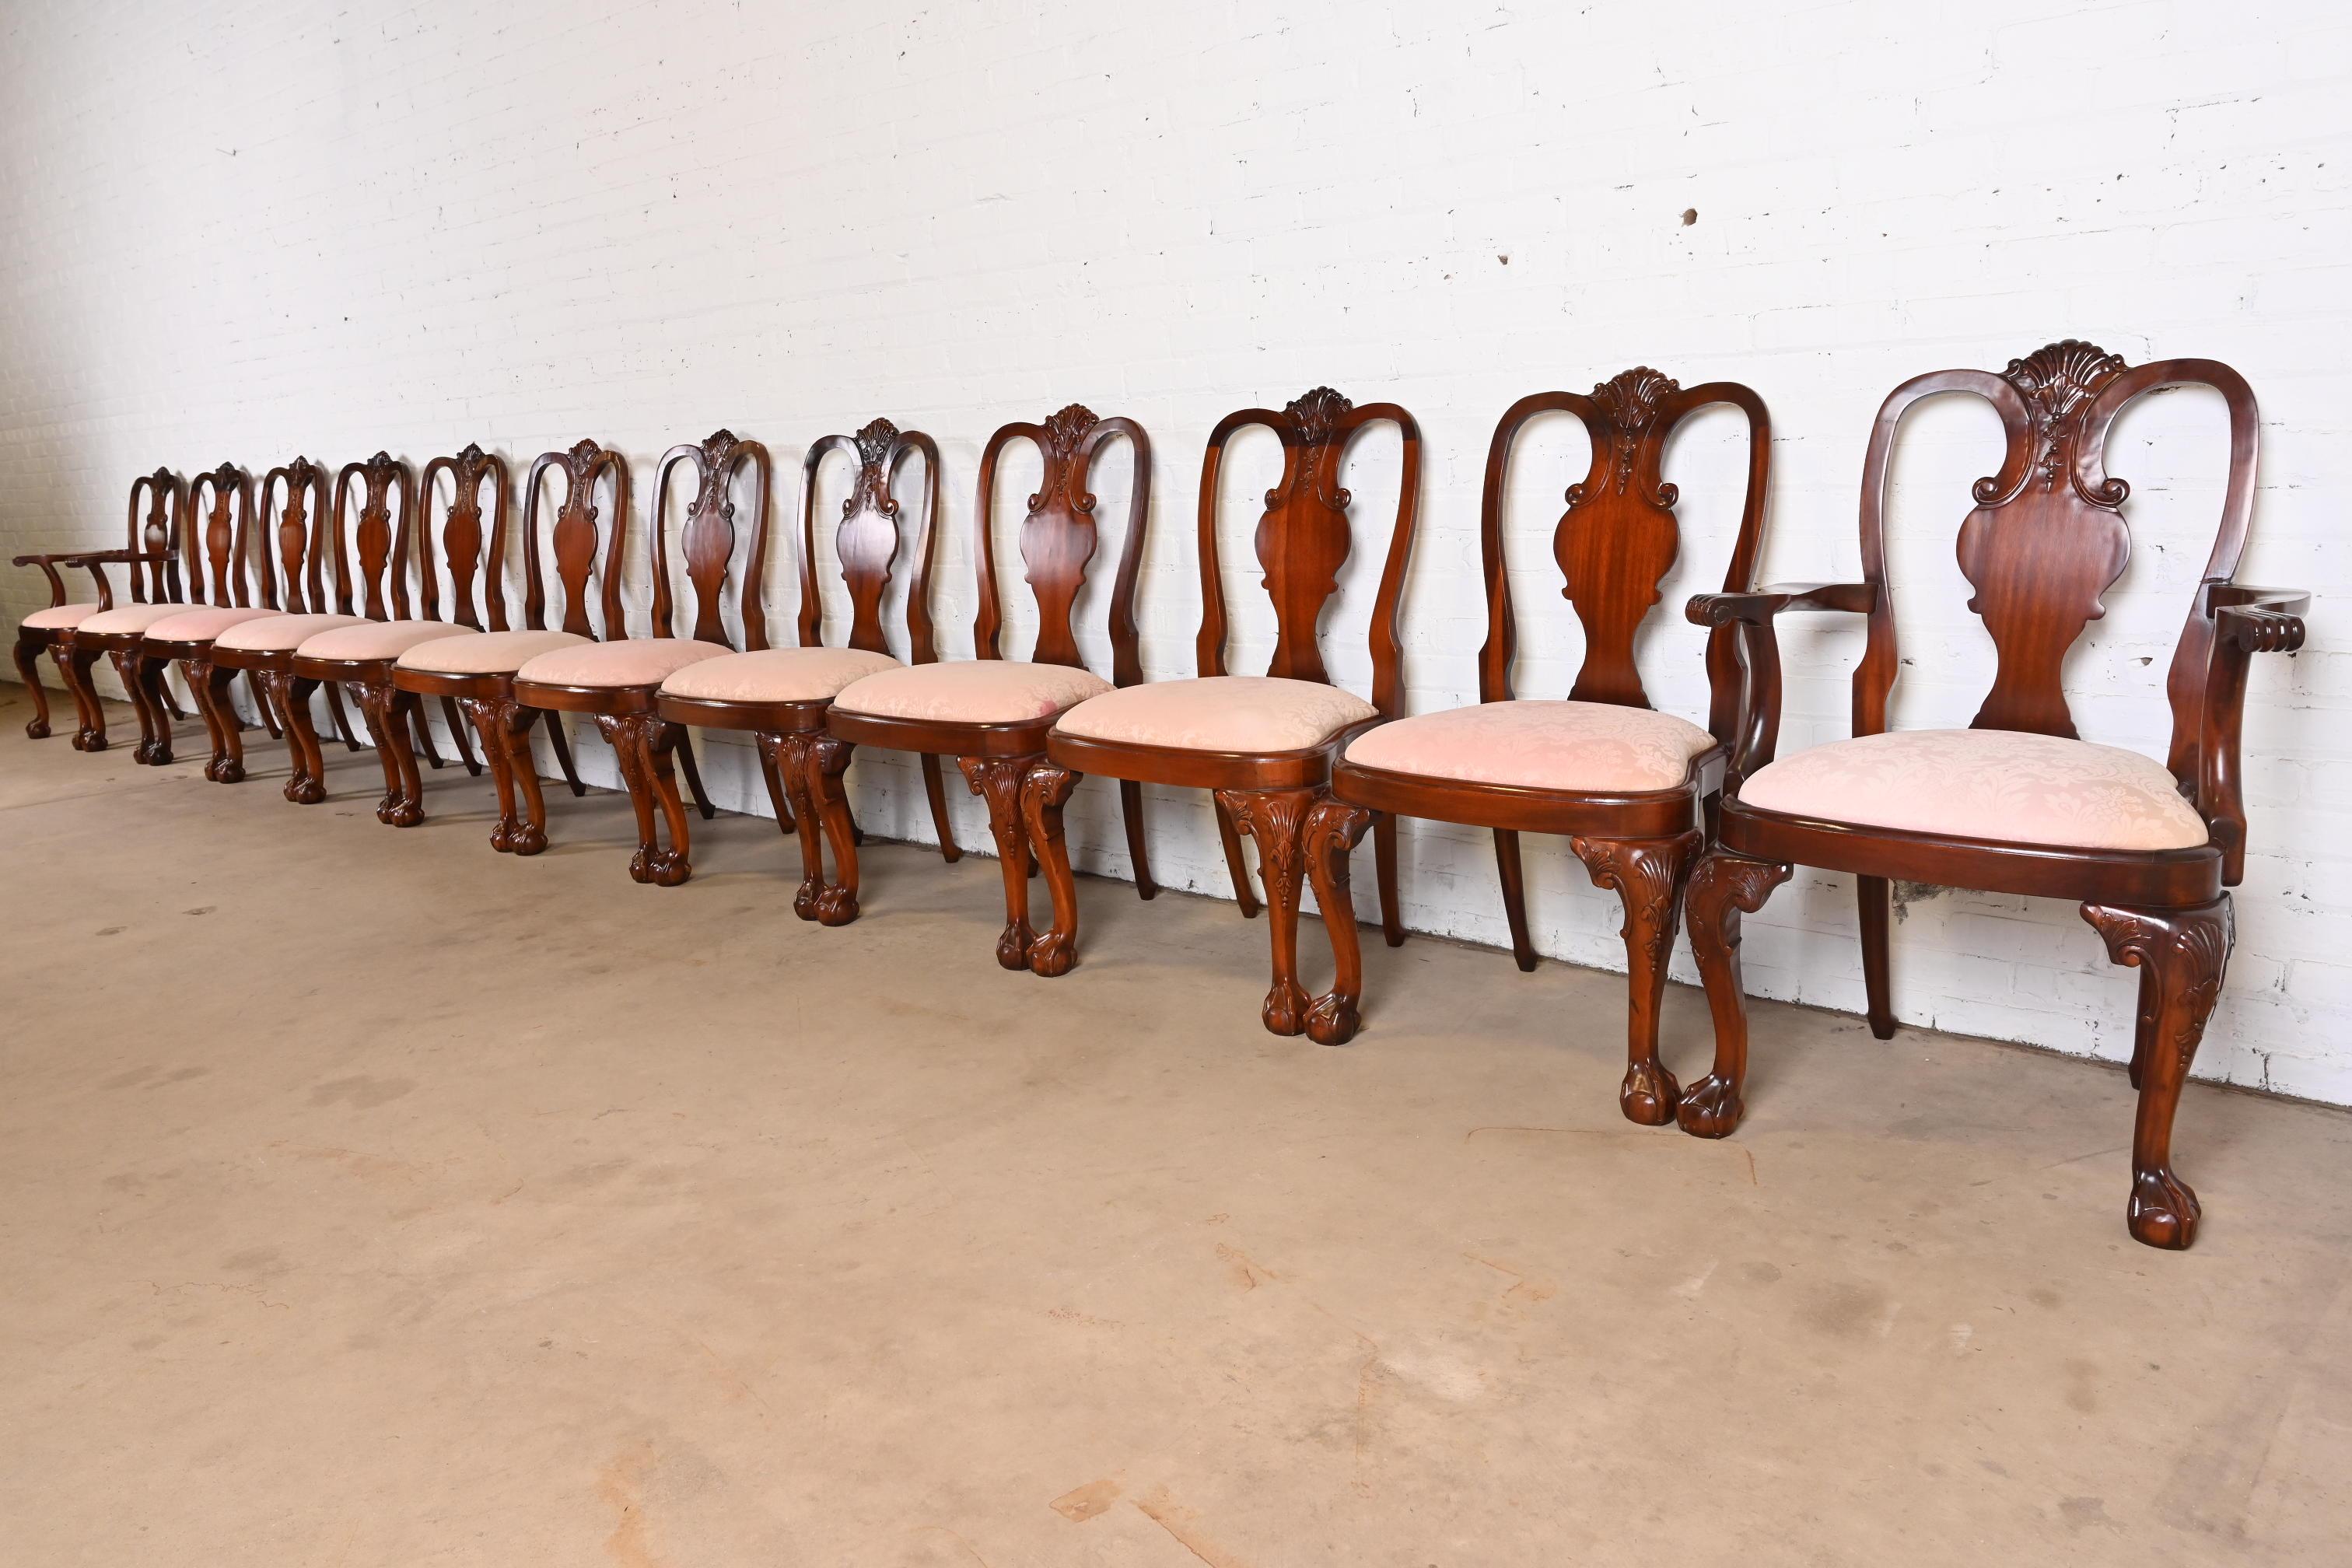 A gorgeous set of twelve Georgian or Chippendale style dining chairs

By Kindel Furniture, 